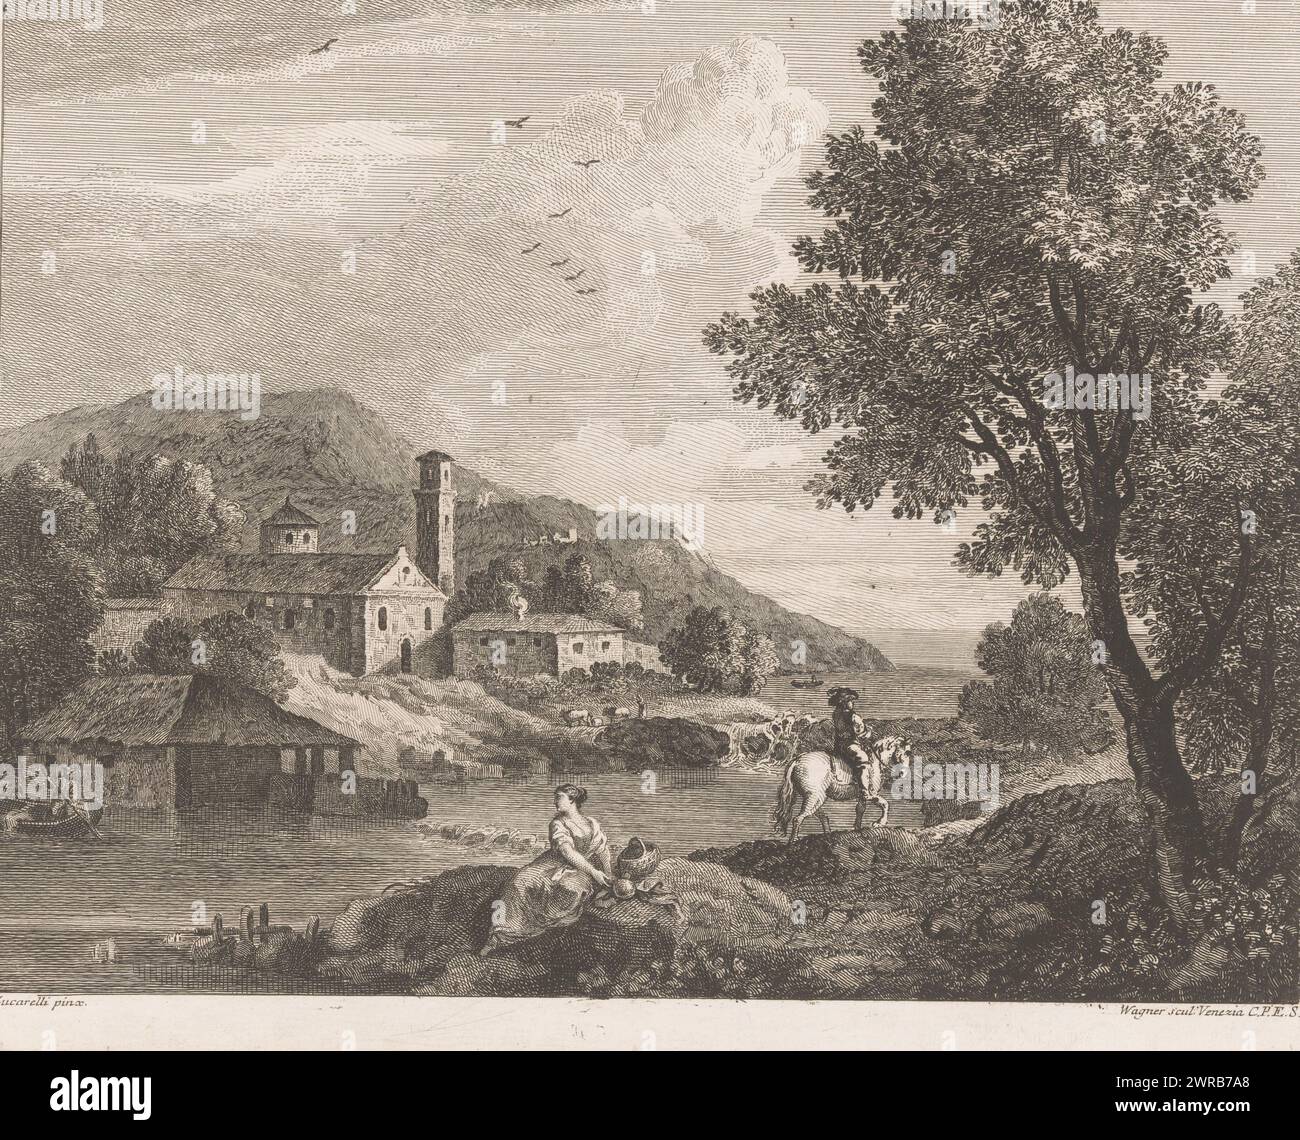 River landscape with a church, print maker: Joseph Wagner, after painting by: Francesco Zuccarelli, Senaat van Venetië, Venice, 1739 - 1780, paper, etching, engraving, height 249 mm × width 311 mm, print Stock Photo